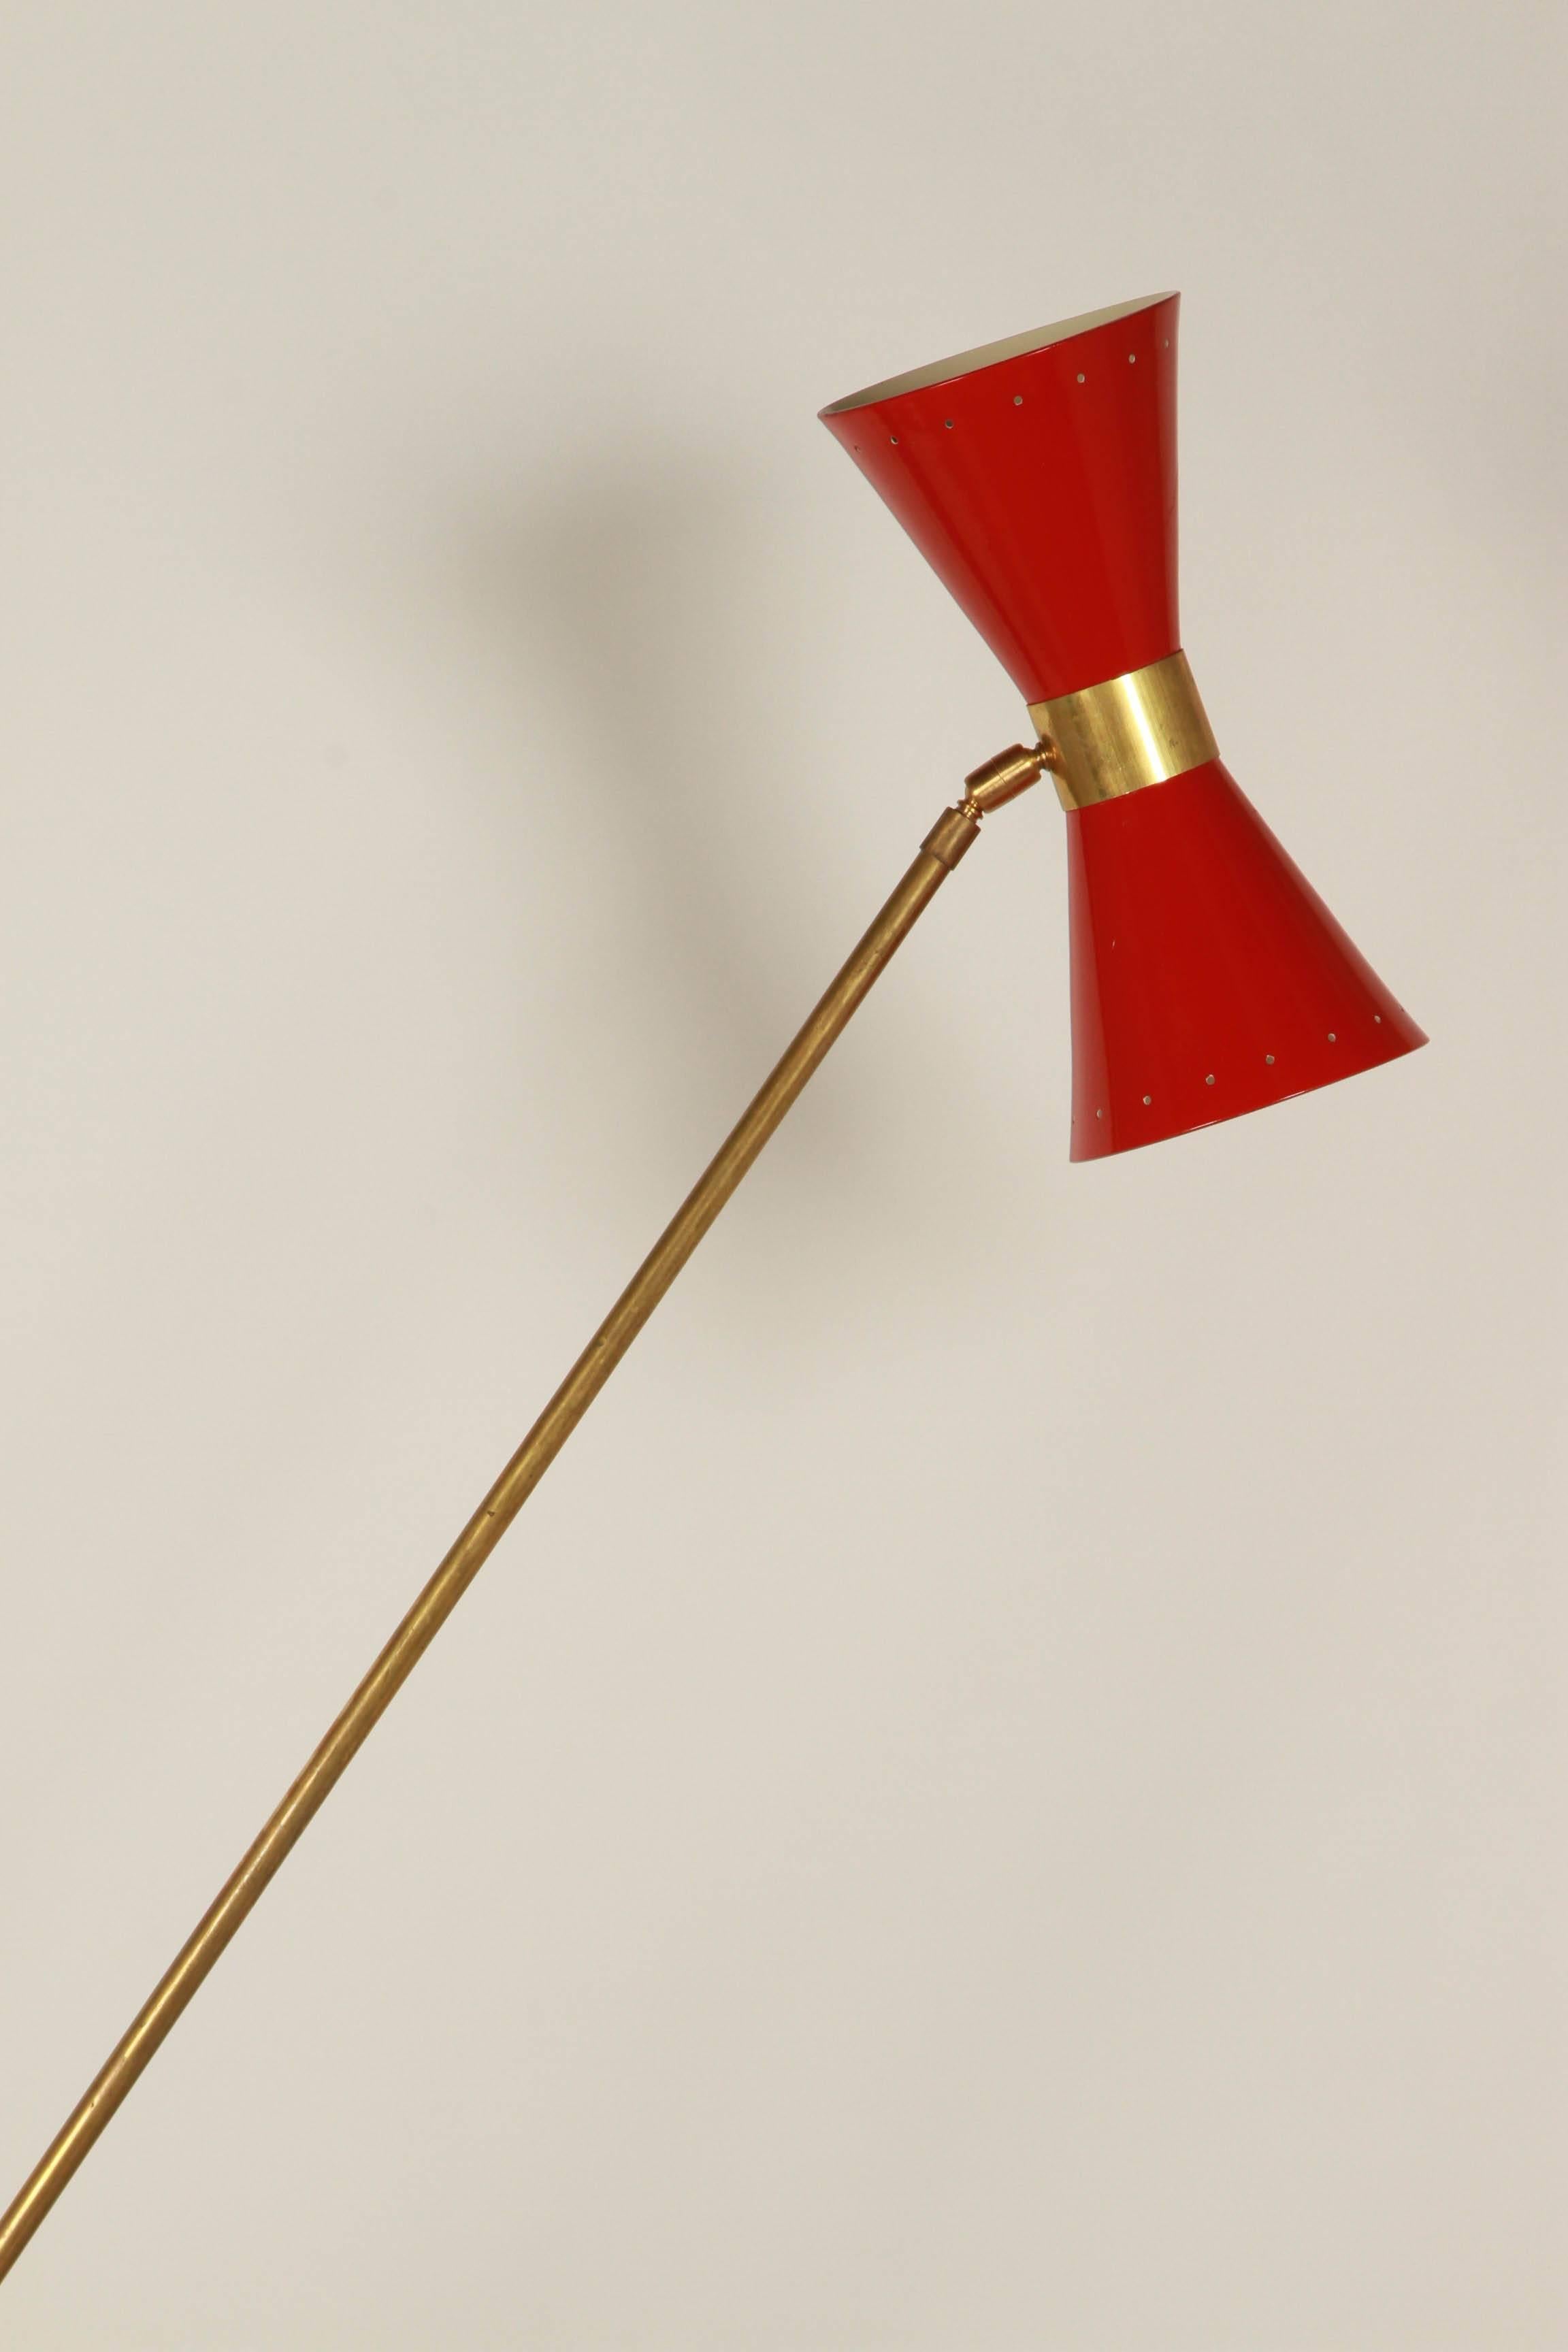 Perforated red enameled shade with heavy brass base and counterweight ball.